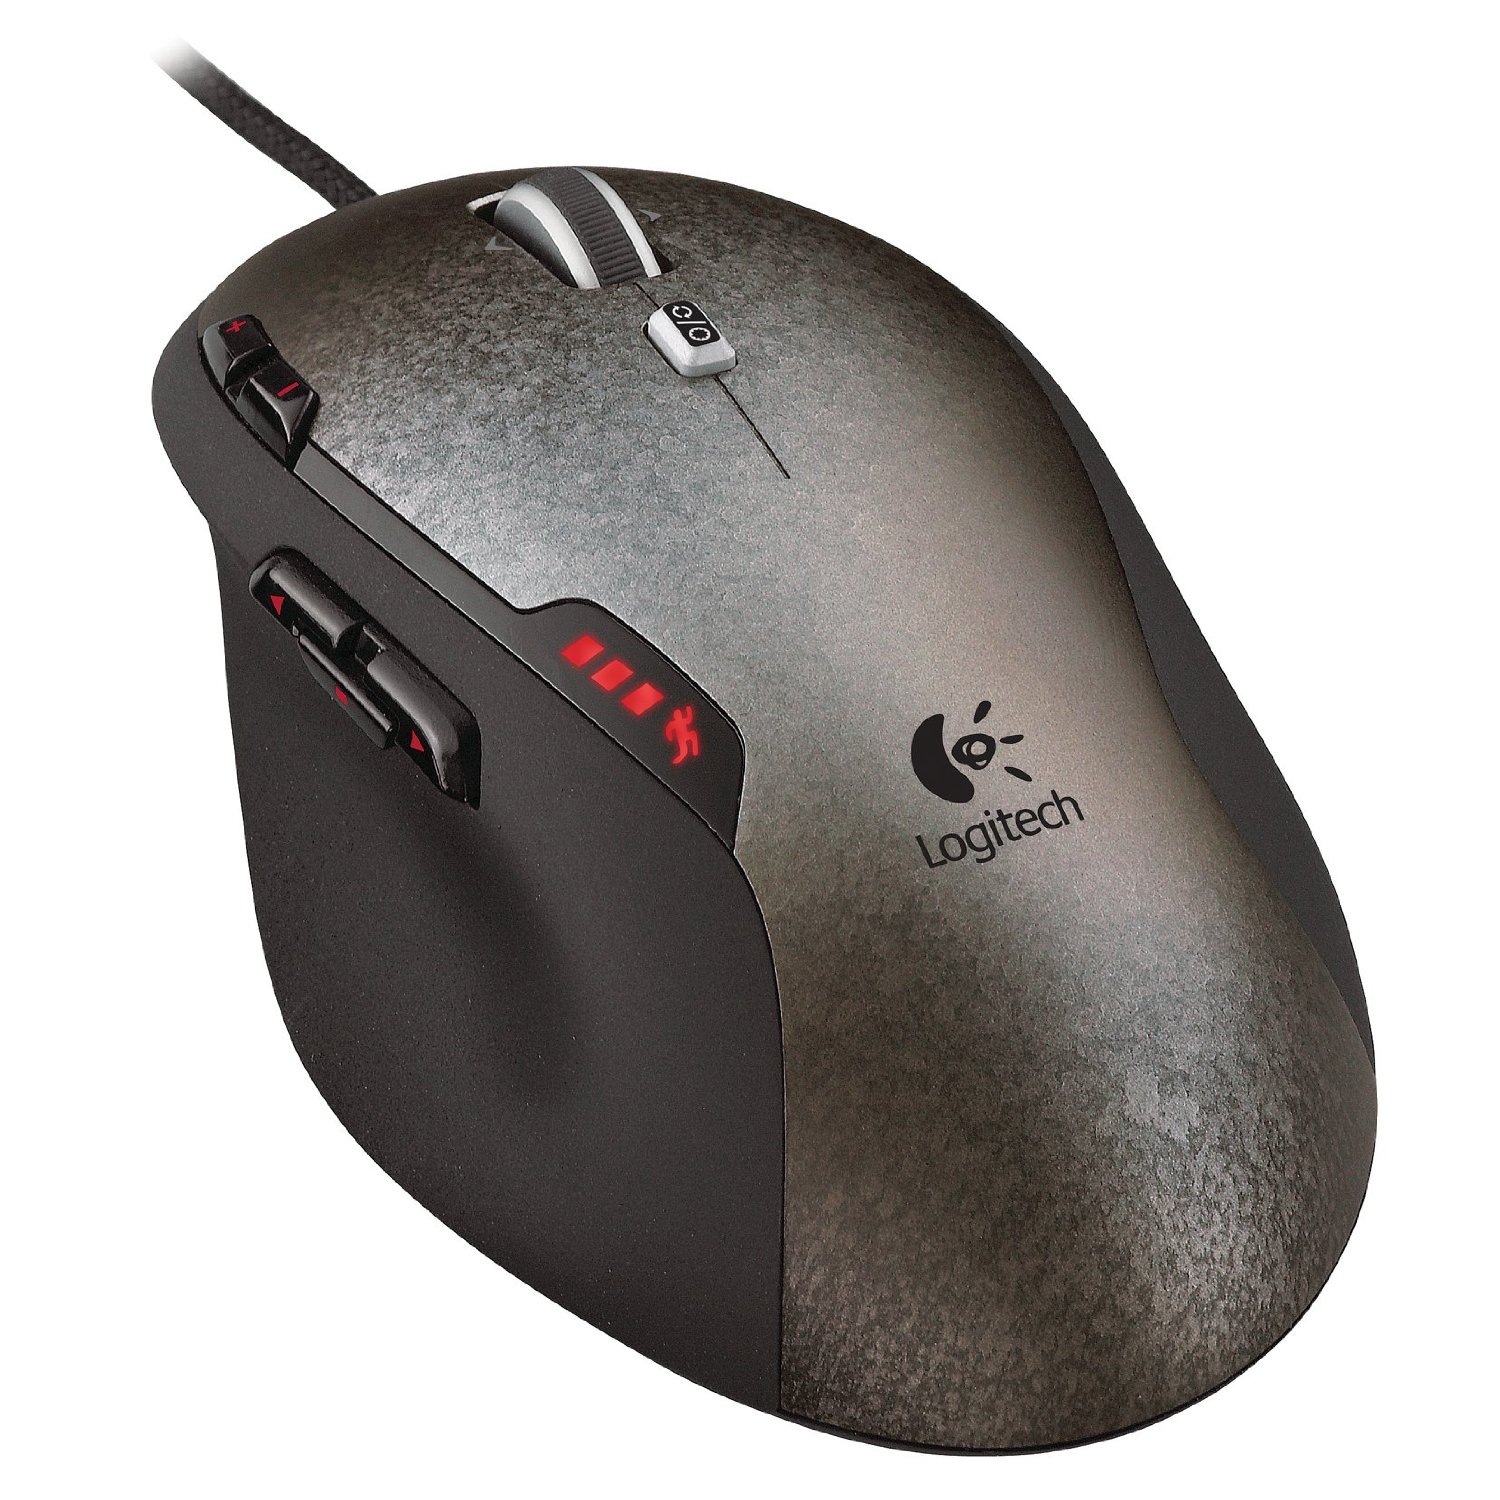 http://thetechjournal.com/wp-content/uploads/images/1110/1317524254-logitech-g500-programmable-gaming-mouse-9.jpg